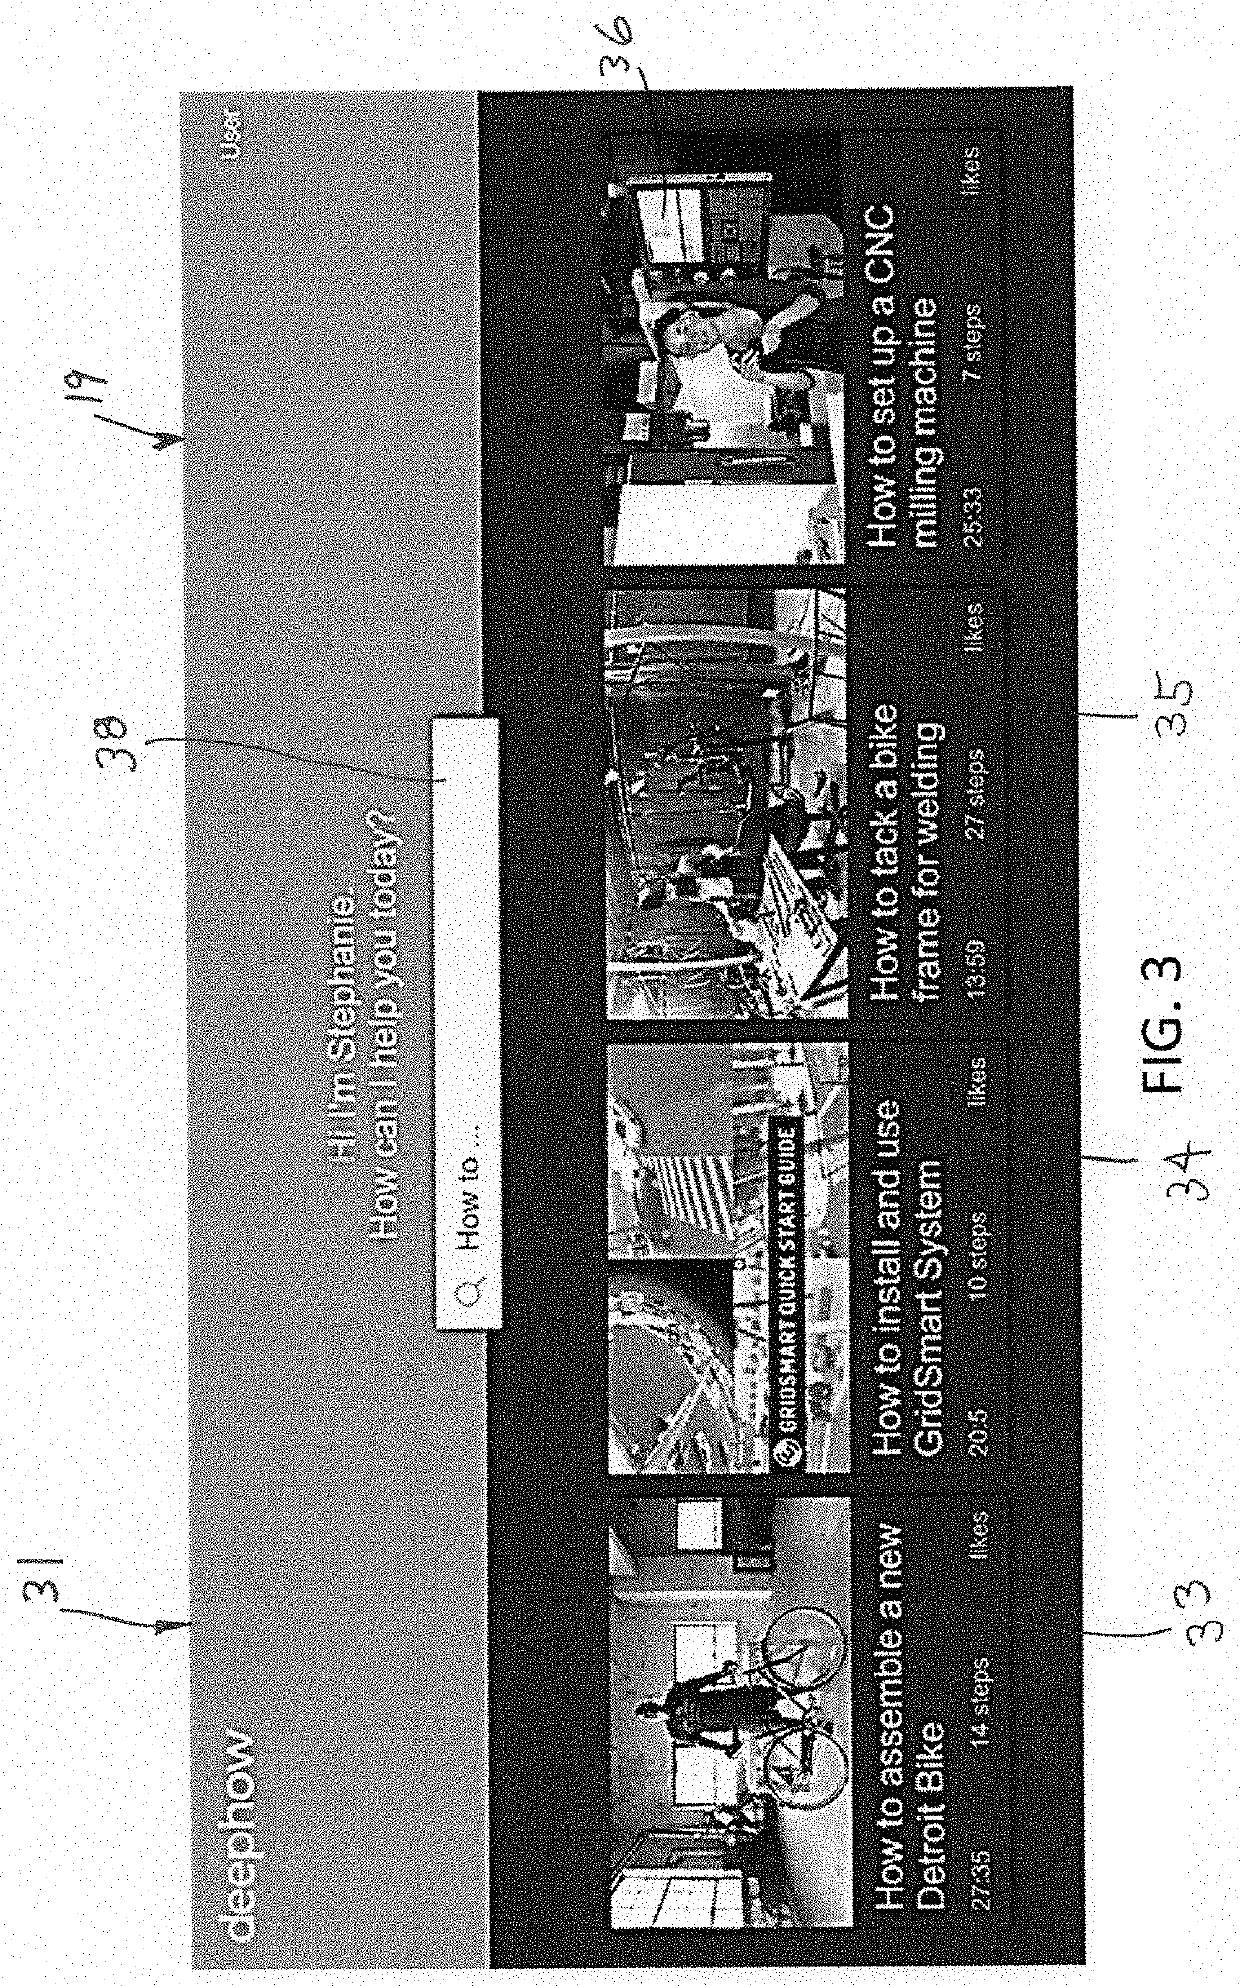 System and method for capturing, indexing and extracting digital workflow from videos using artificial intelligence